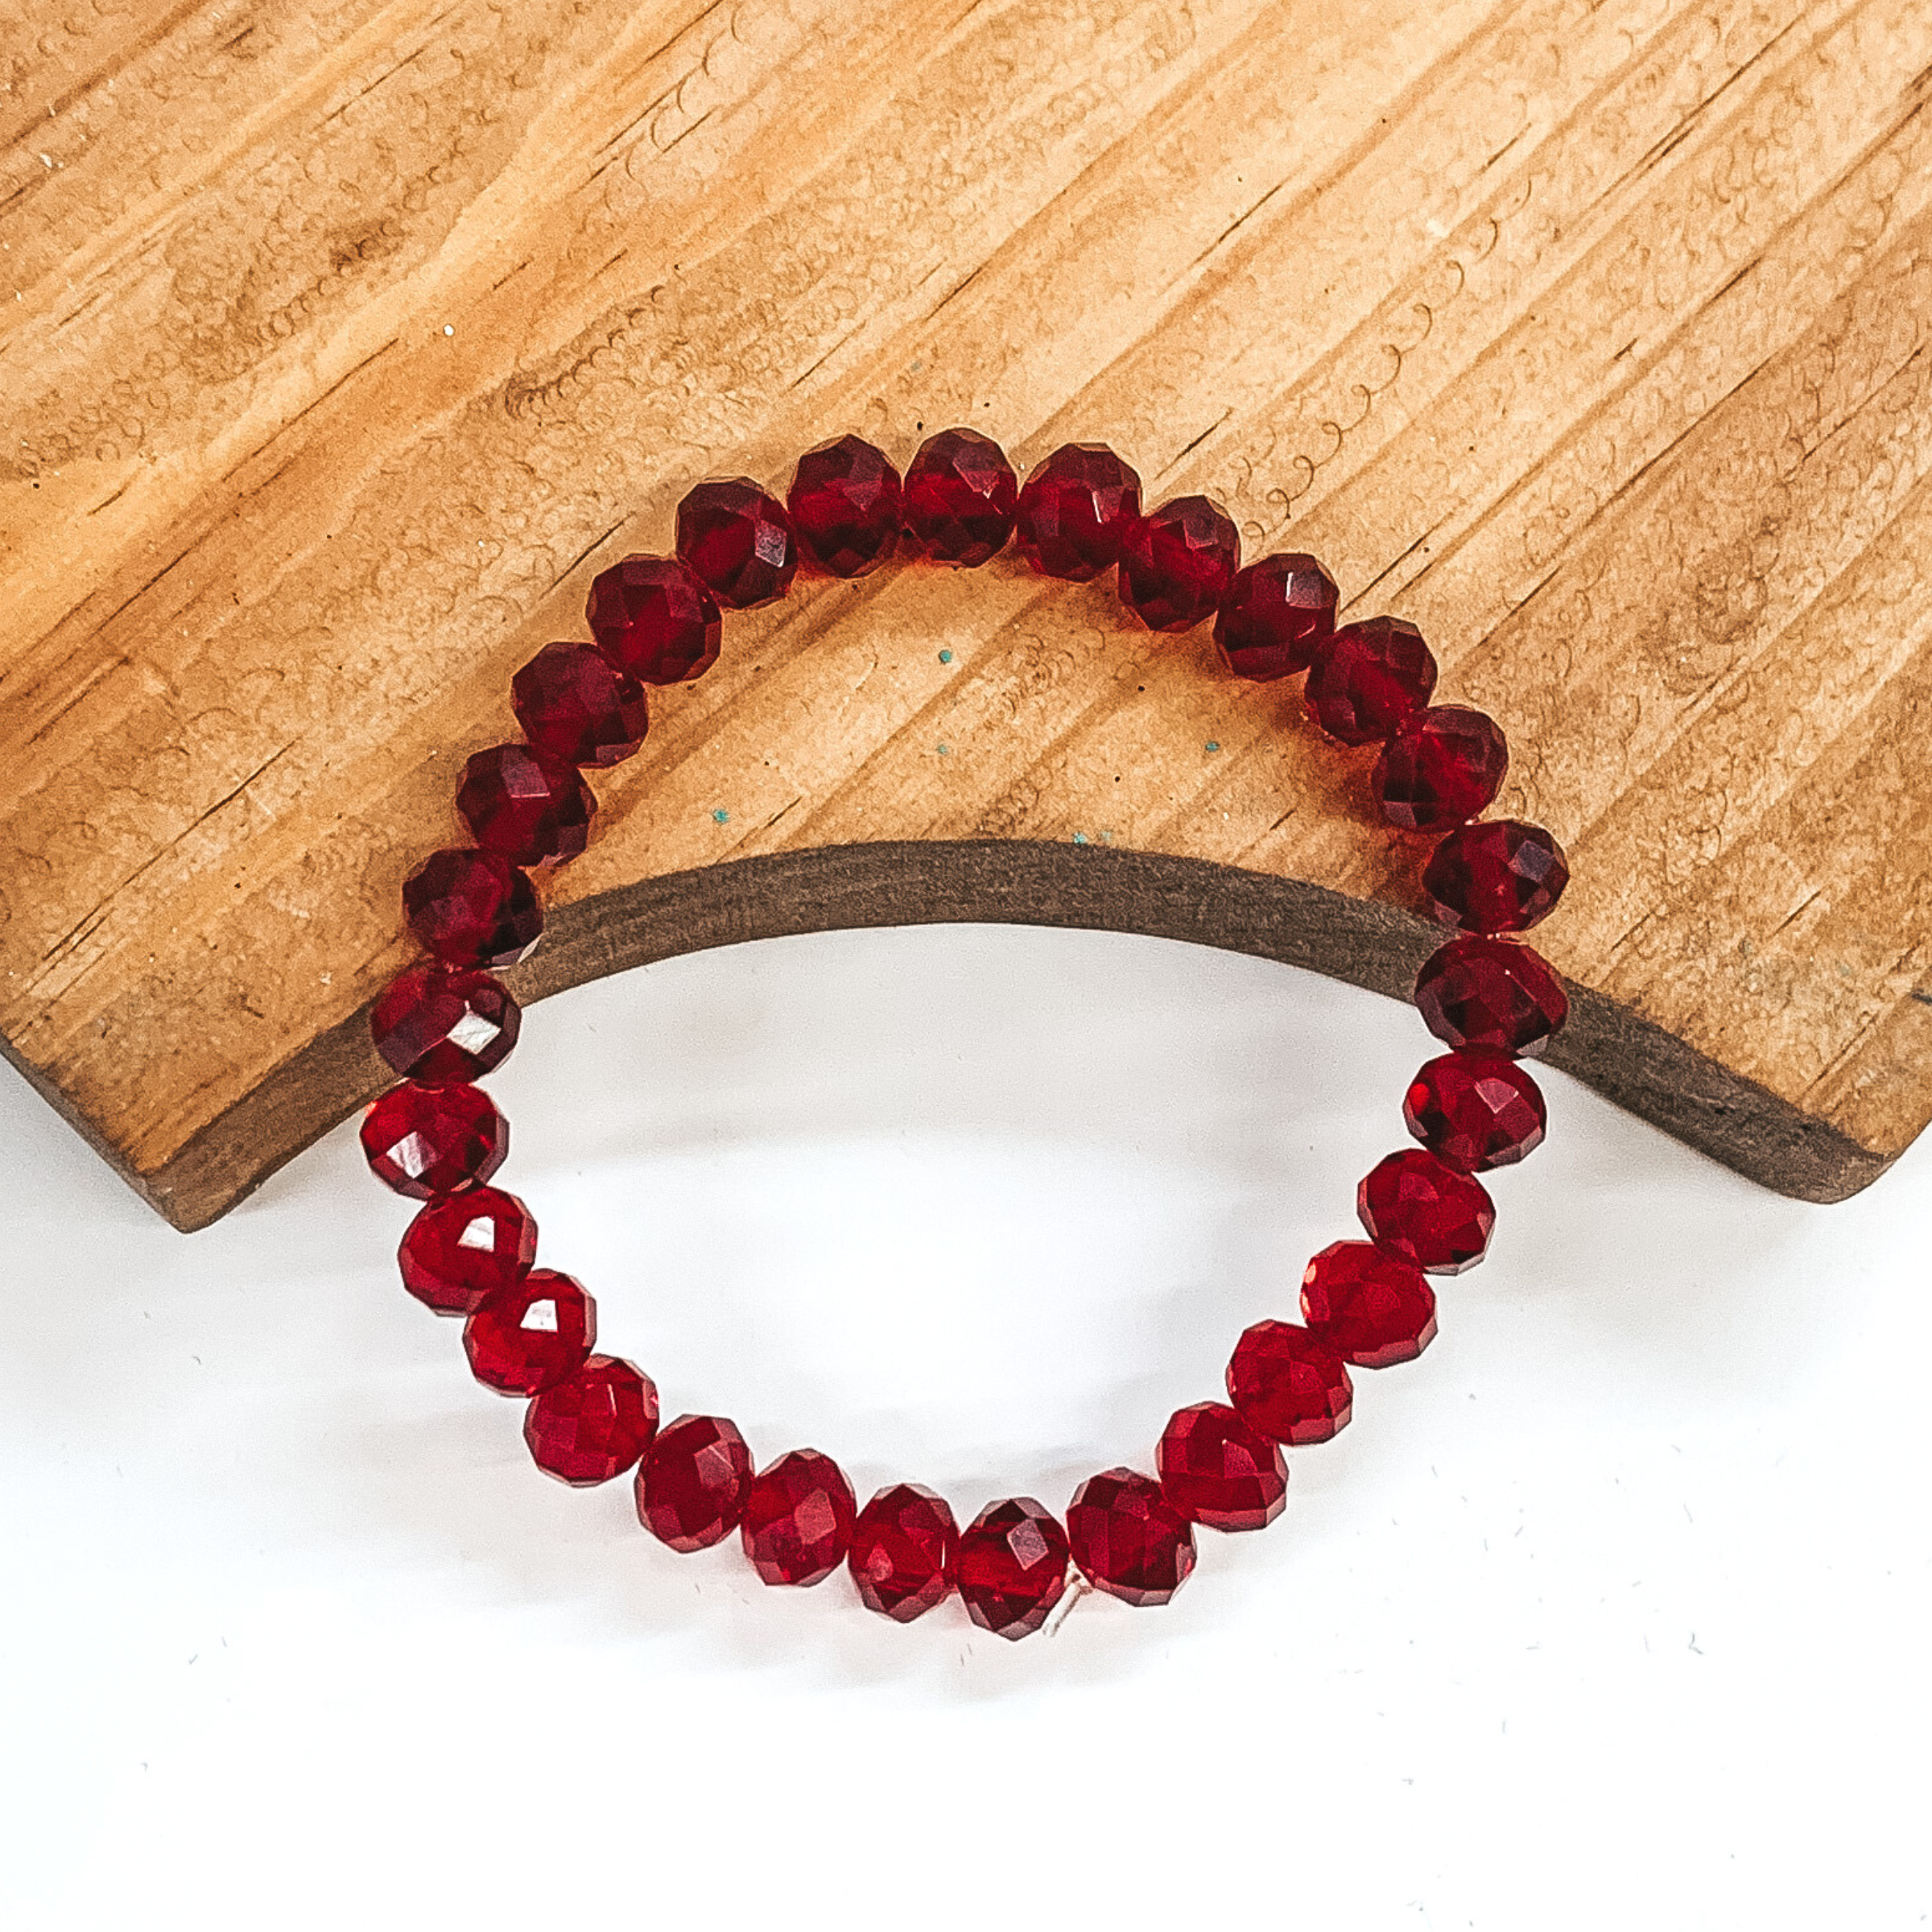 Maroon crystal beaded bracelet. This bracelet is pictured laying partially on a brown block on a white background.